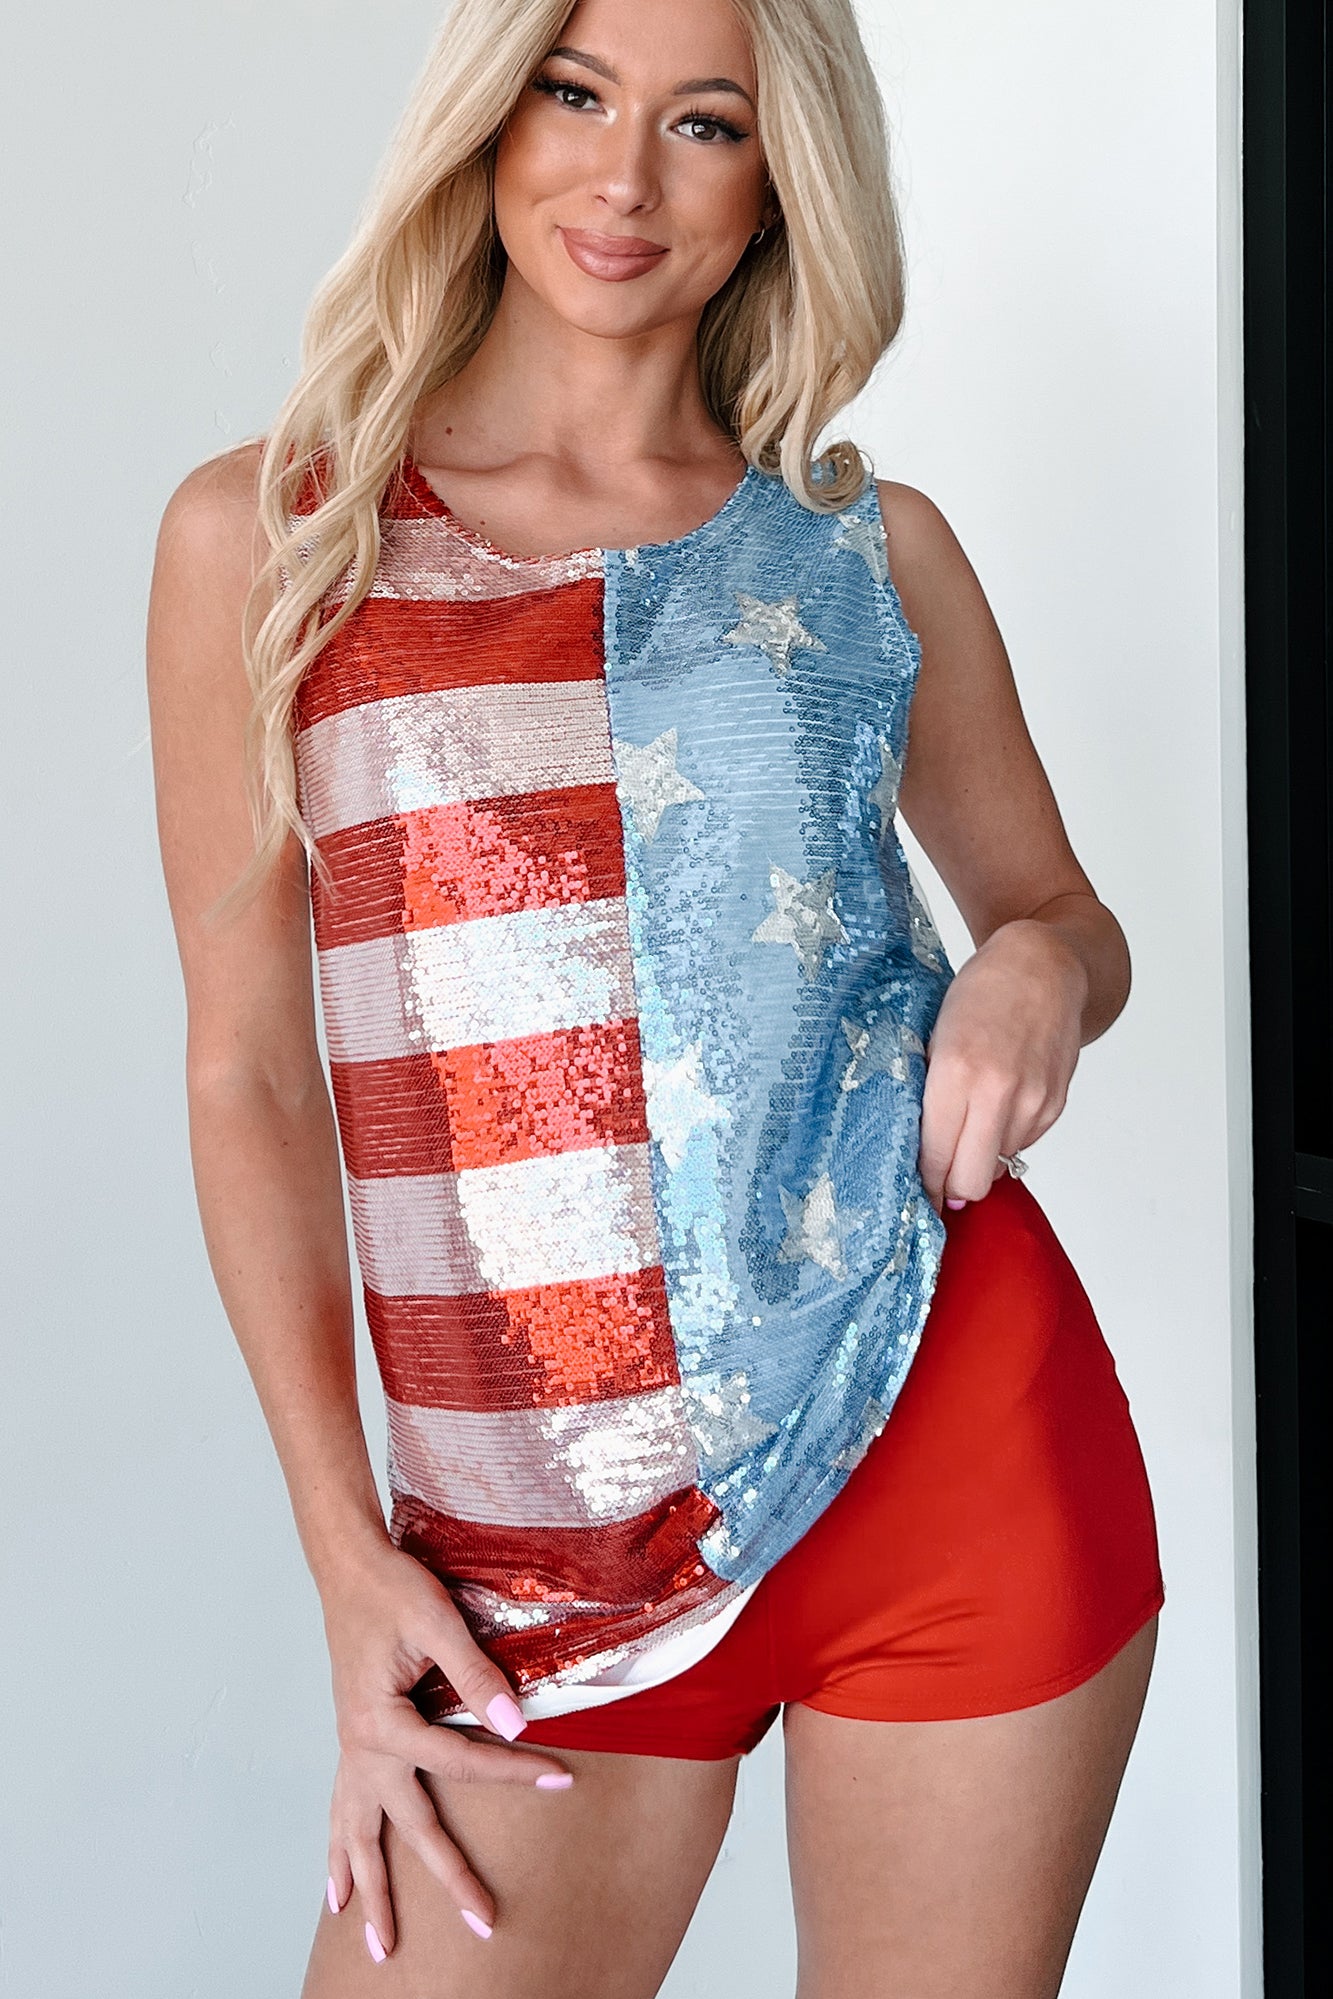 Yankee Doodle Day Sequin American Flag Top (Navy/Red) - NanaMacs